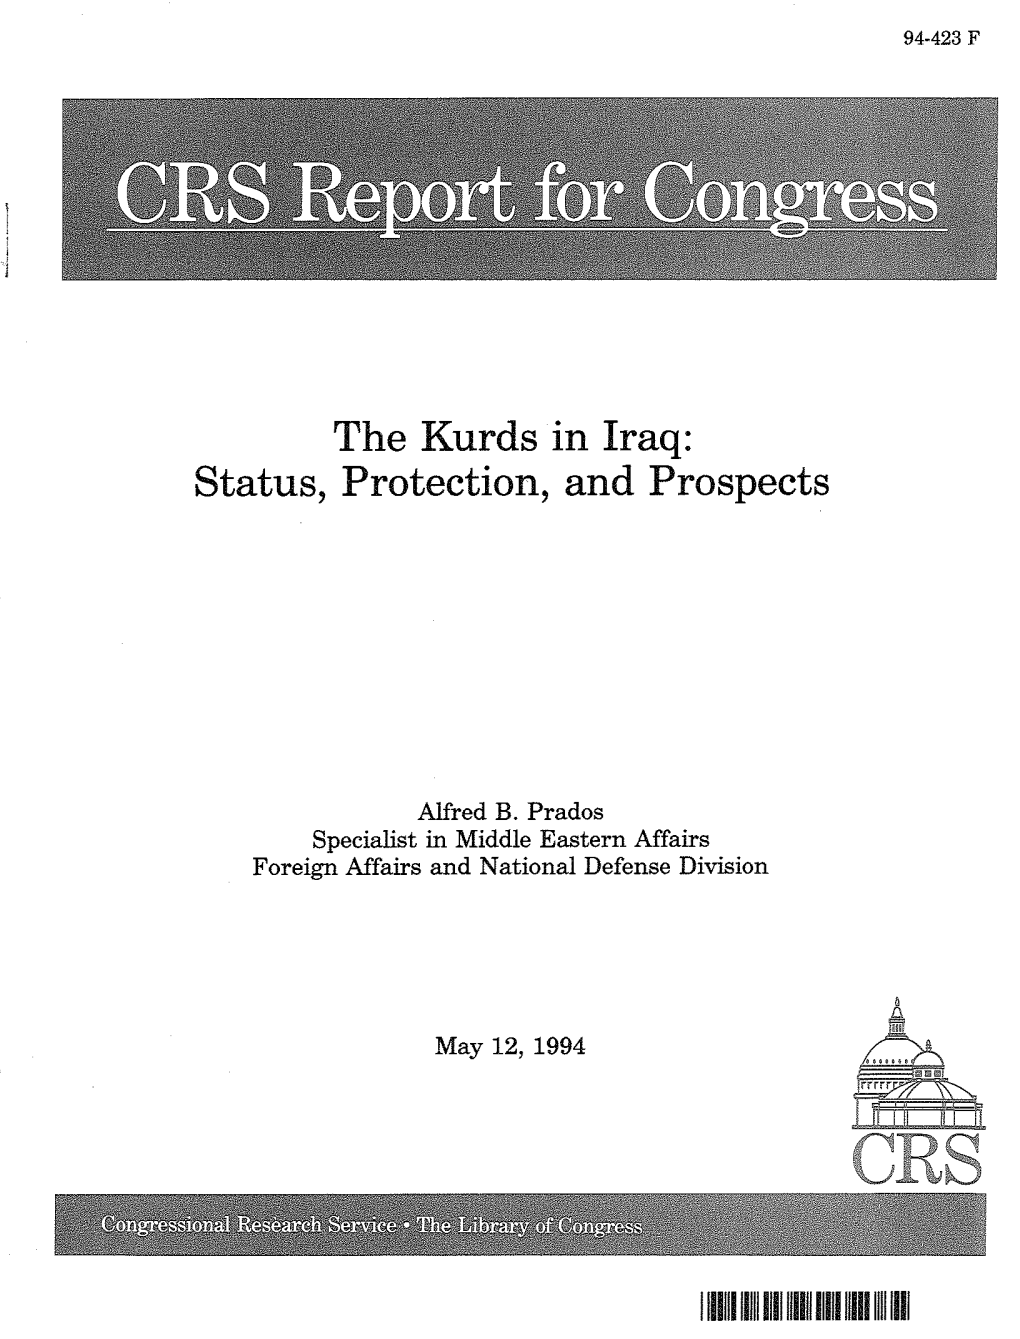 The Kurds in Iraq: Status, Protection, and Prospects